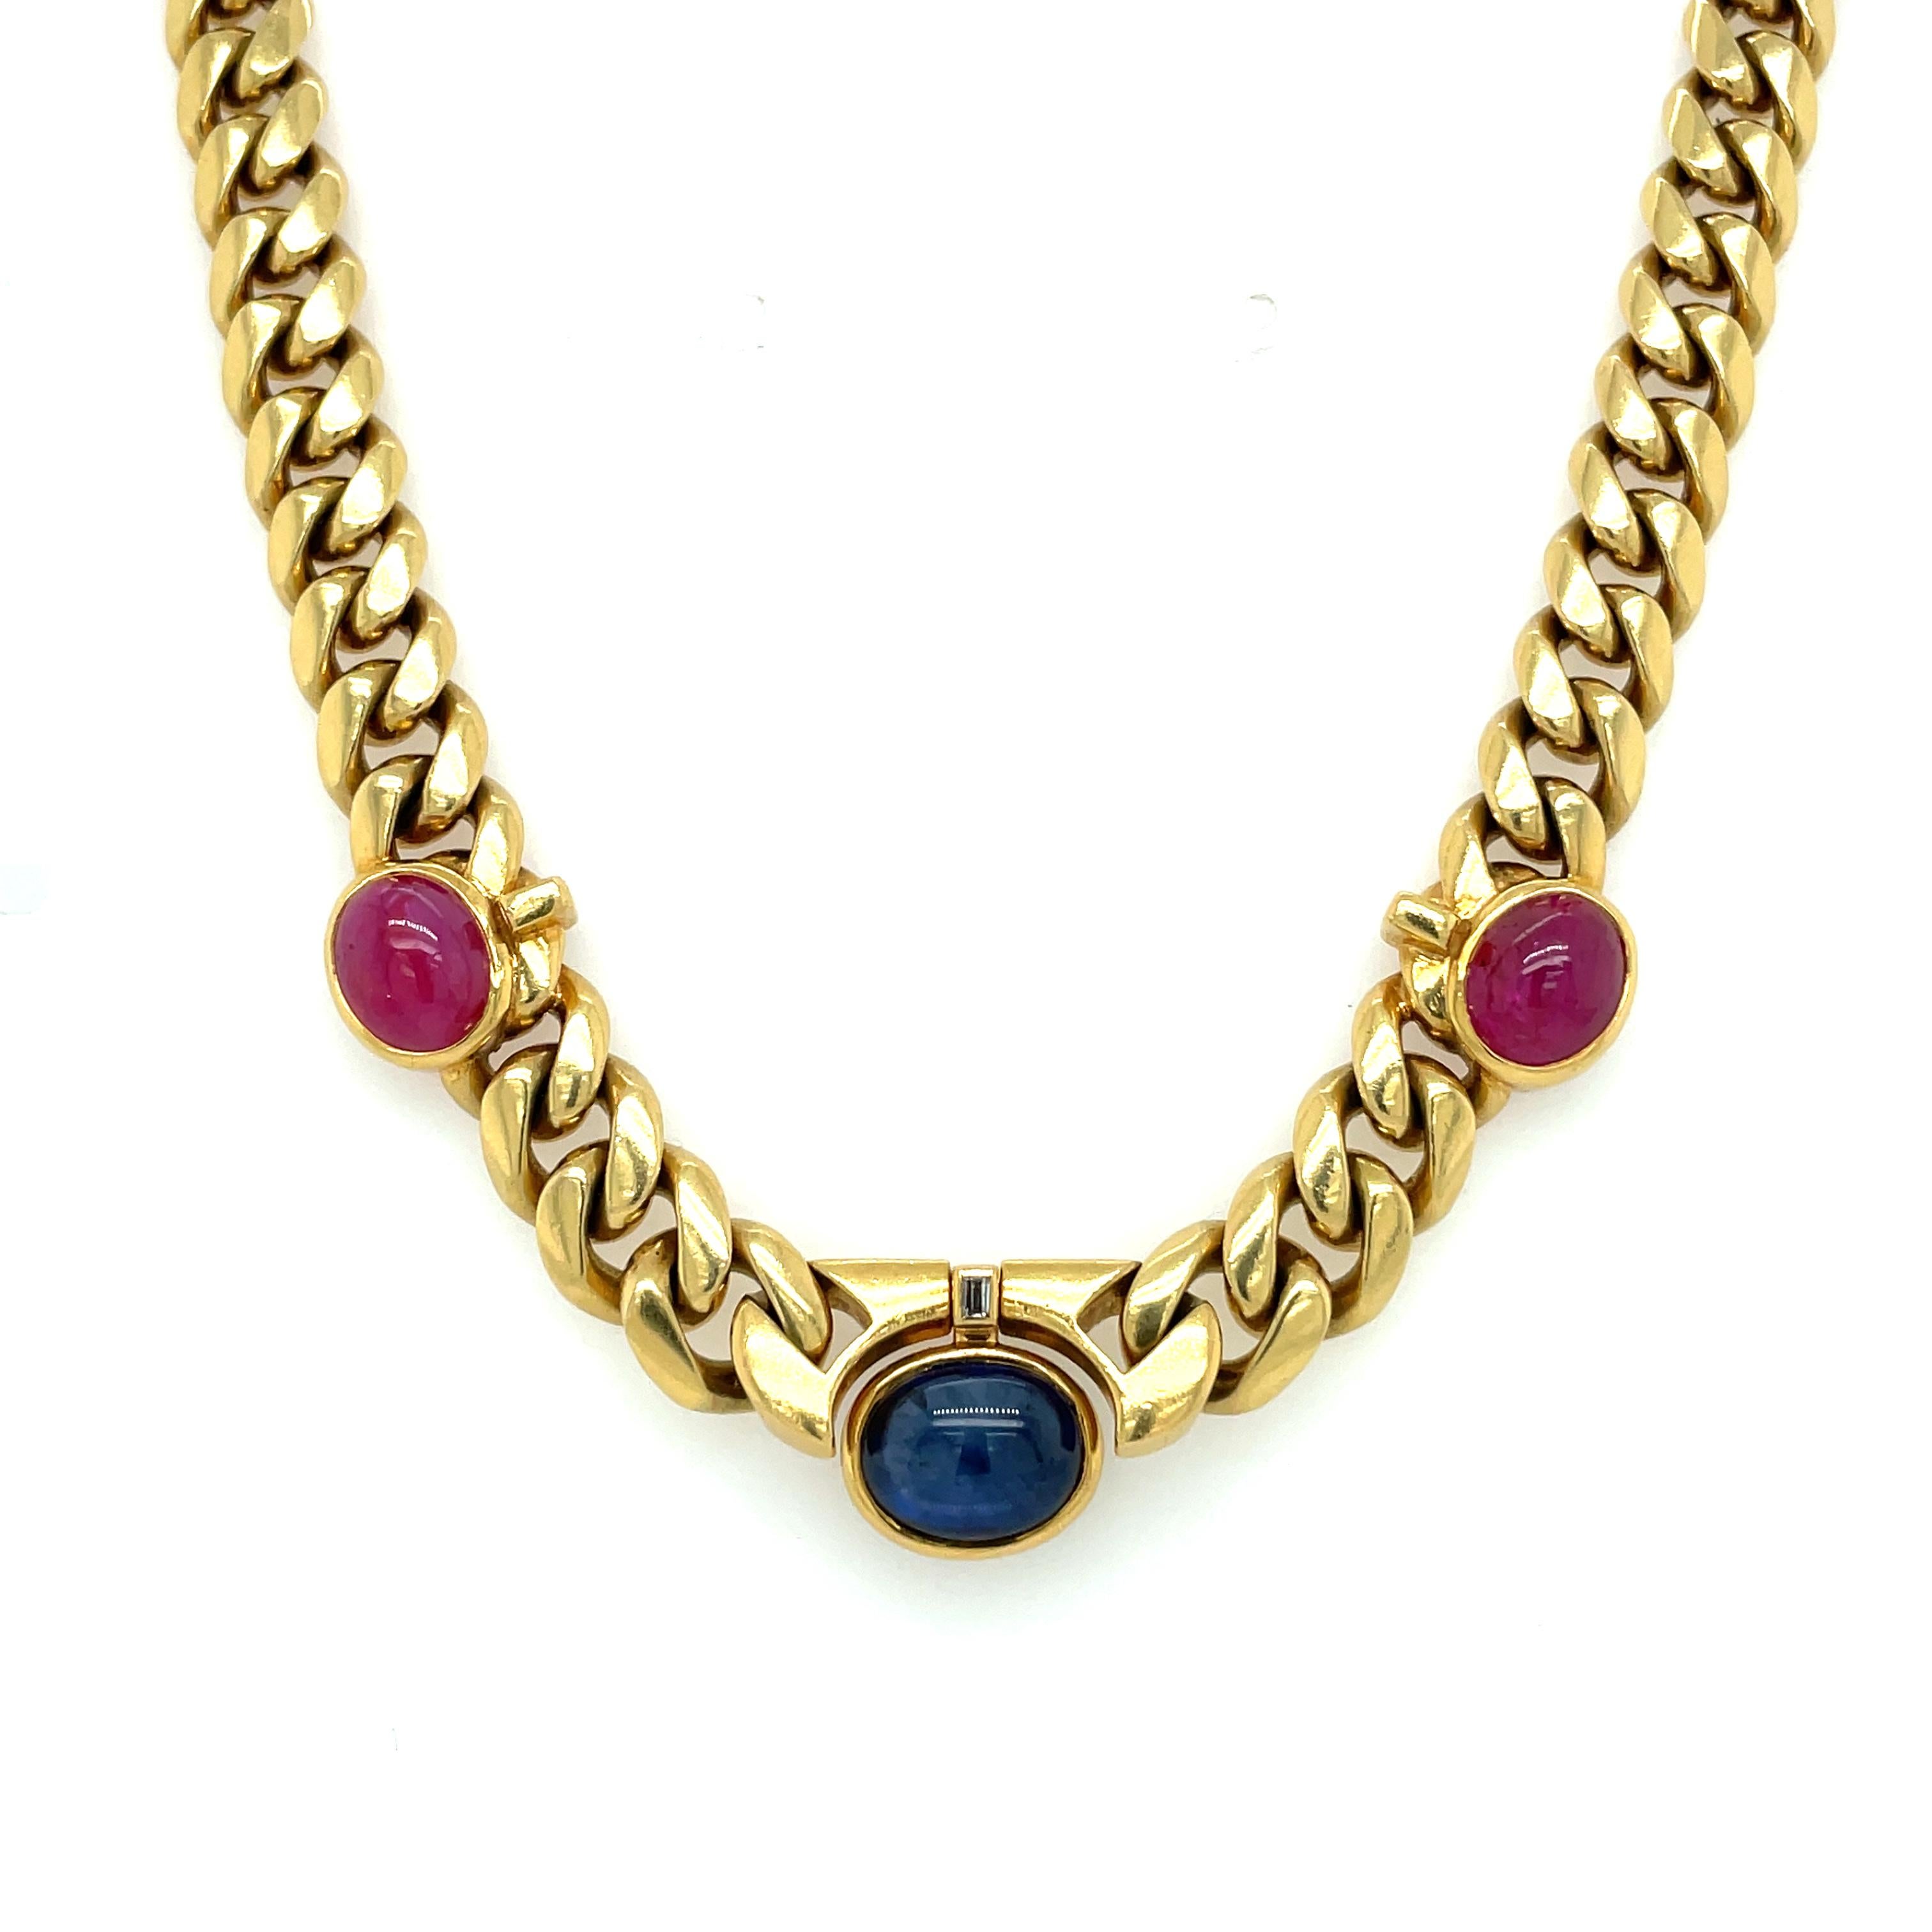 Designed as curb link chain featuring three stations featuring oval shaped cabochons. Consisting of two Natural unheated certified Ruby and one large certified Sapphire adorned by a baguette cut diamond. Made in France 1970

Ruby: 5 total